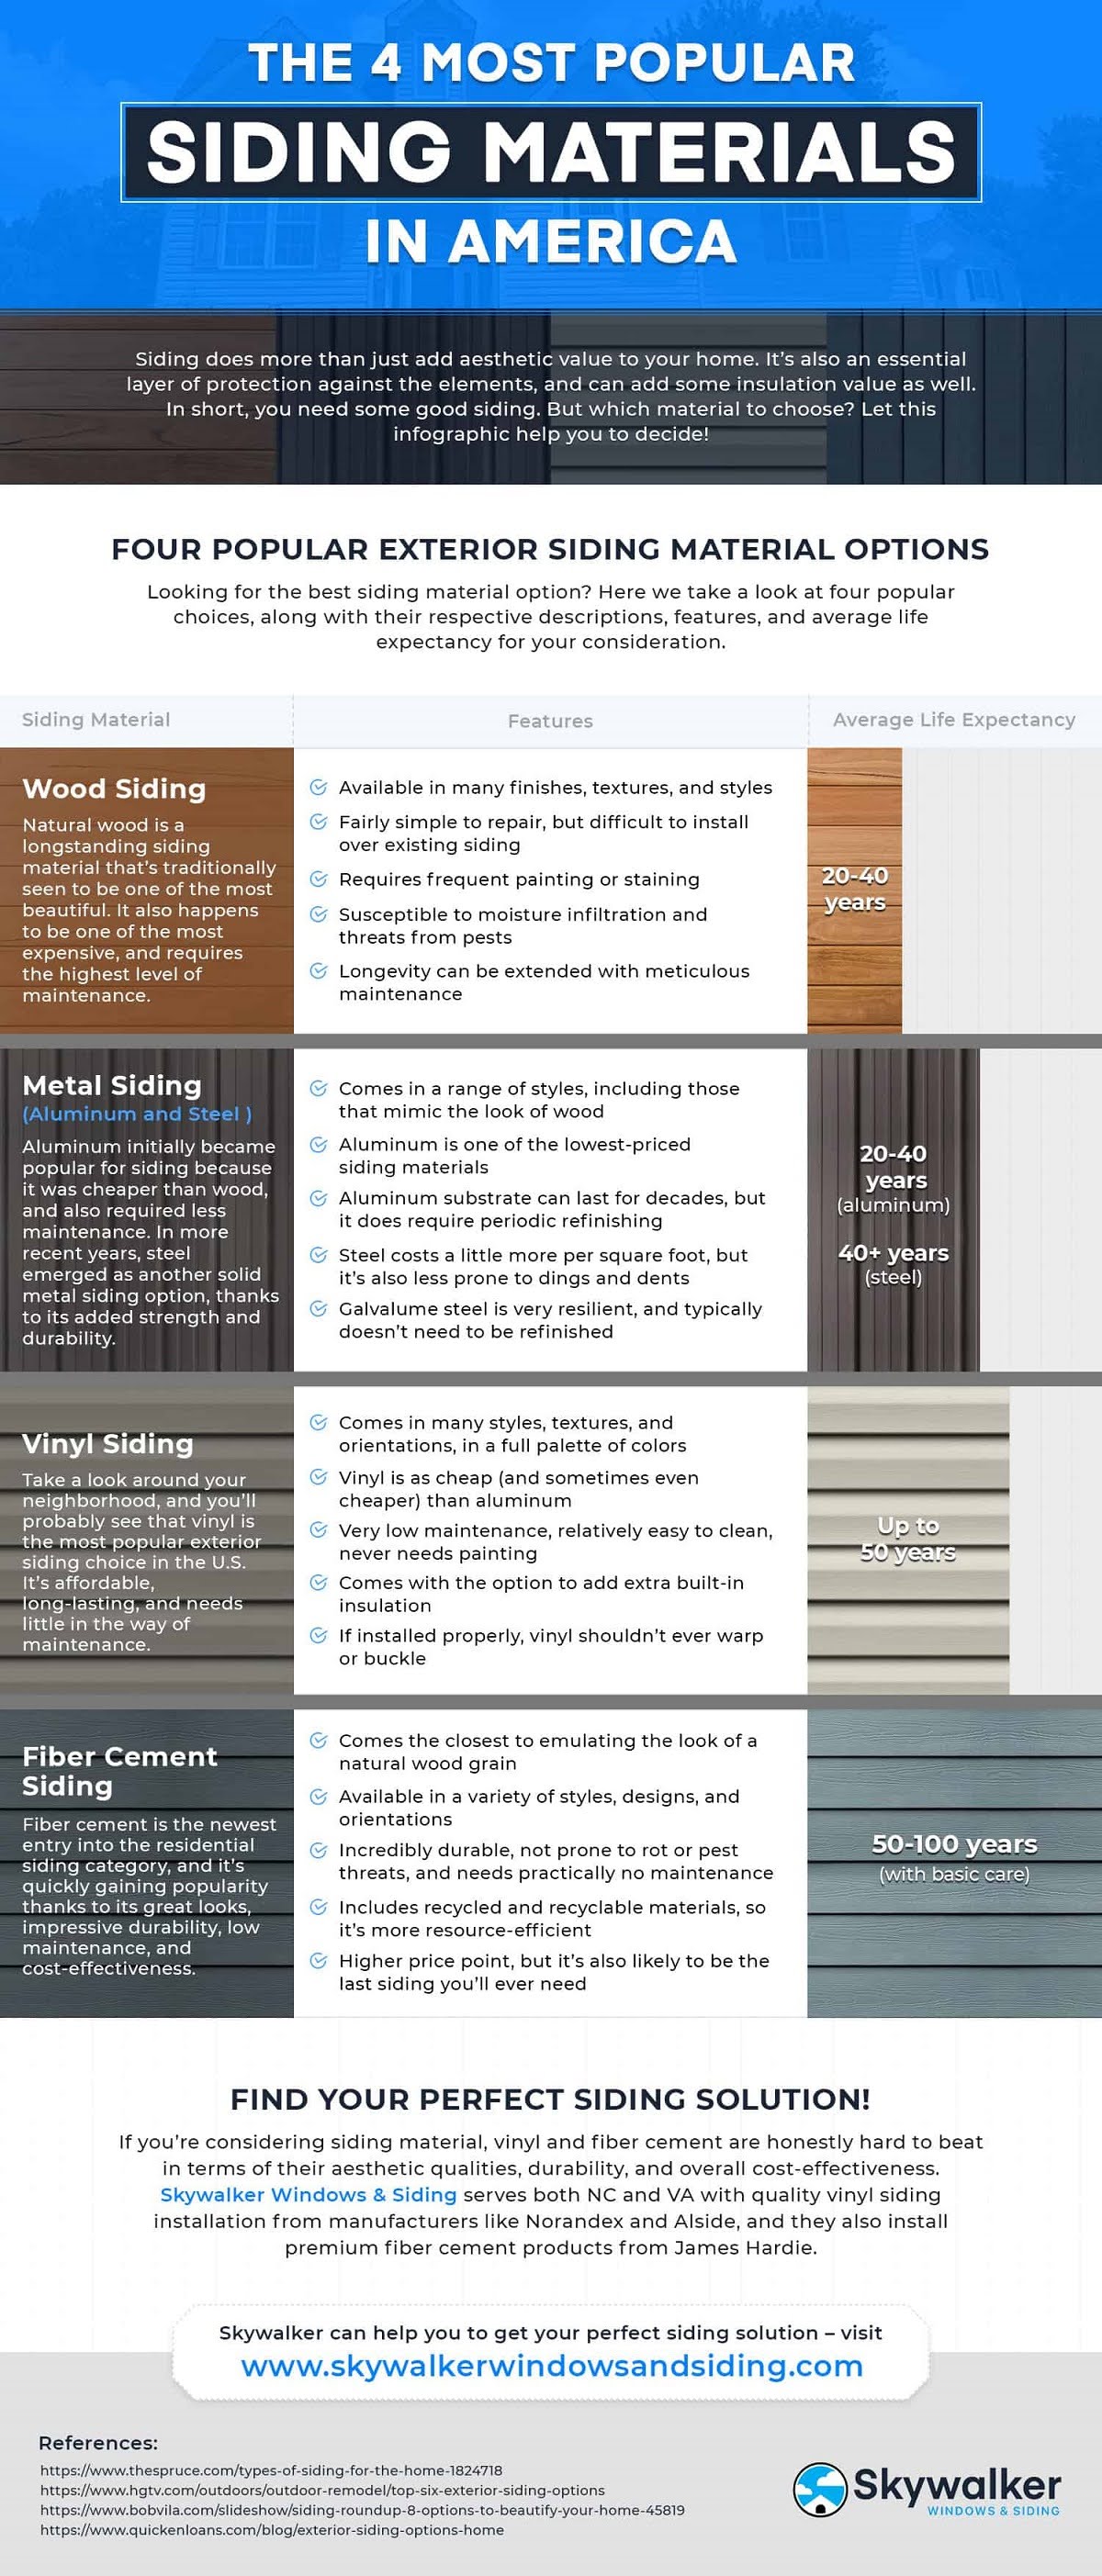 The 4 Most Popular Siding Materials in America #infographic